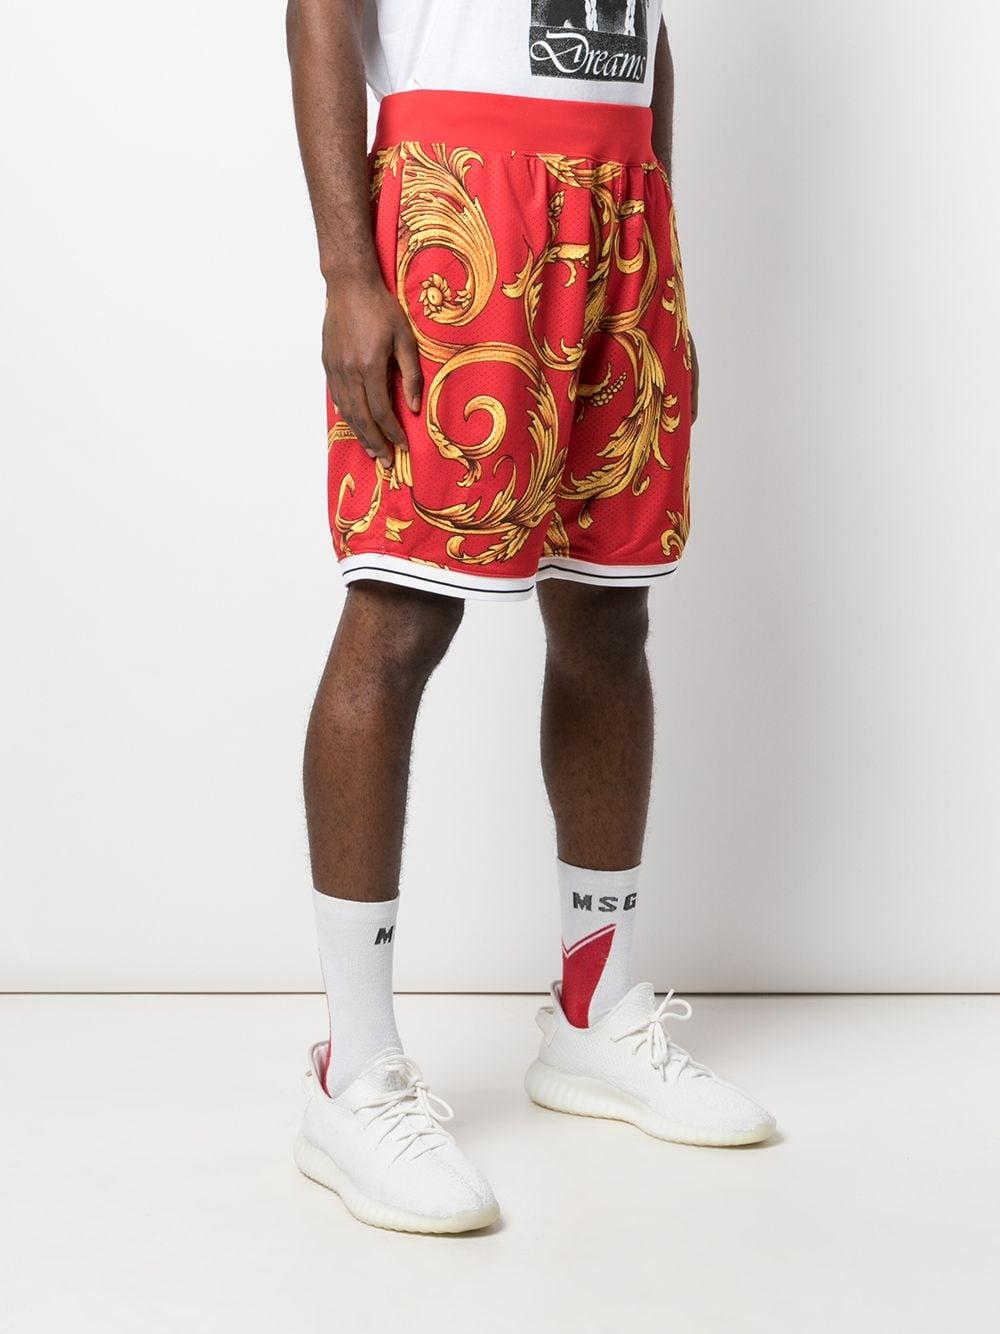 Supreme X Nike Sports Shorts in Red for Men - Lyst